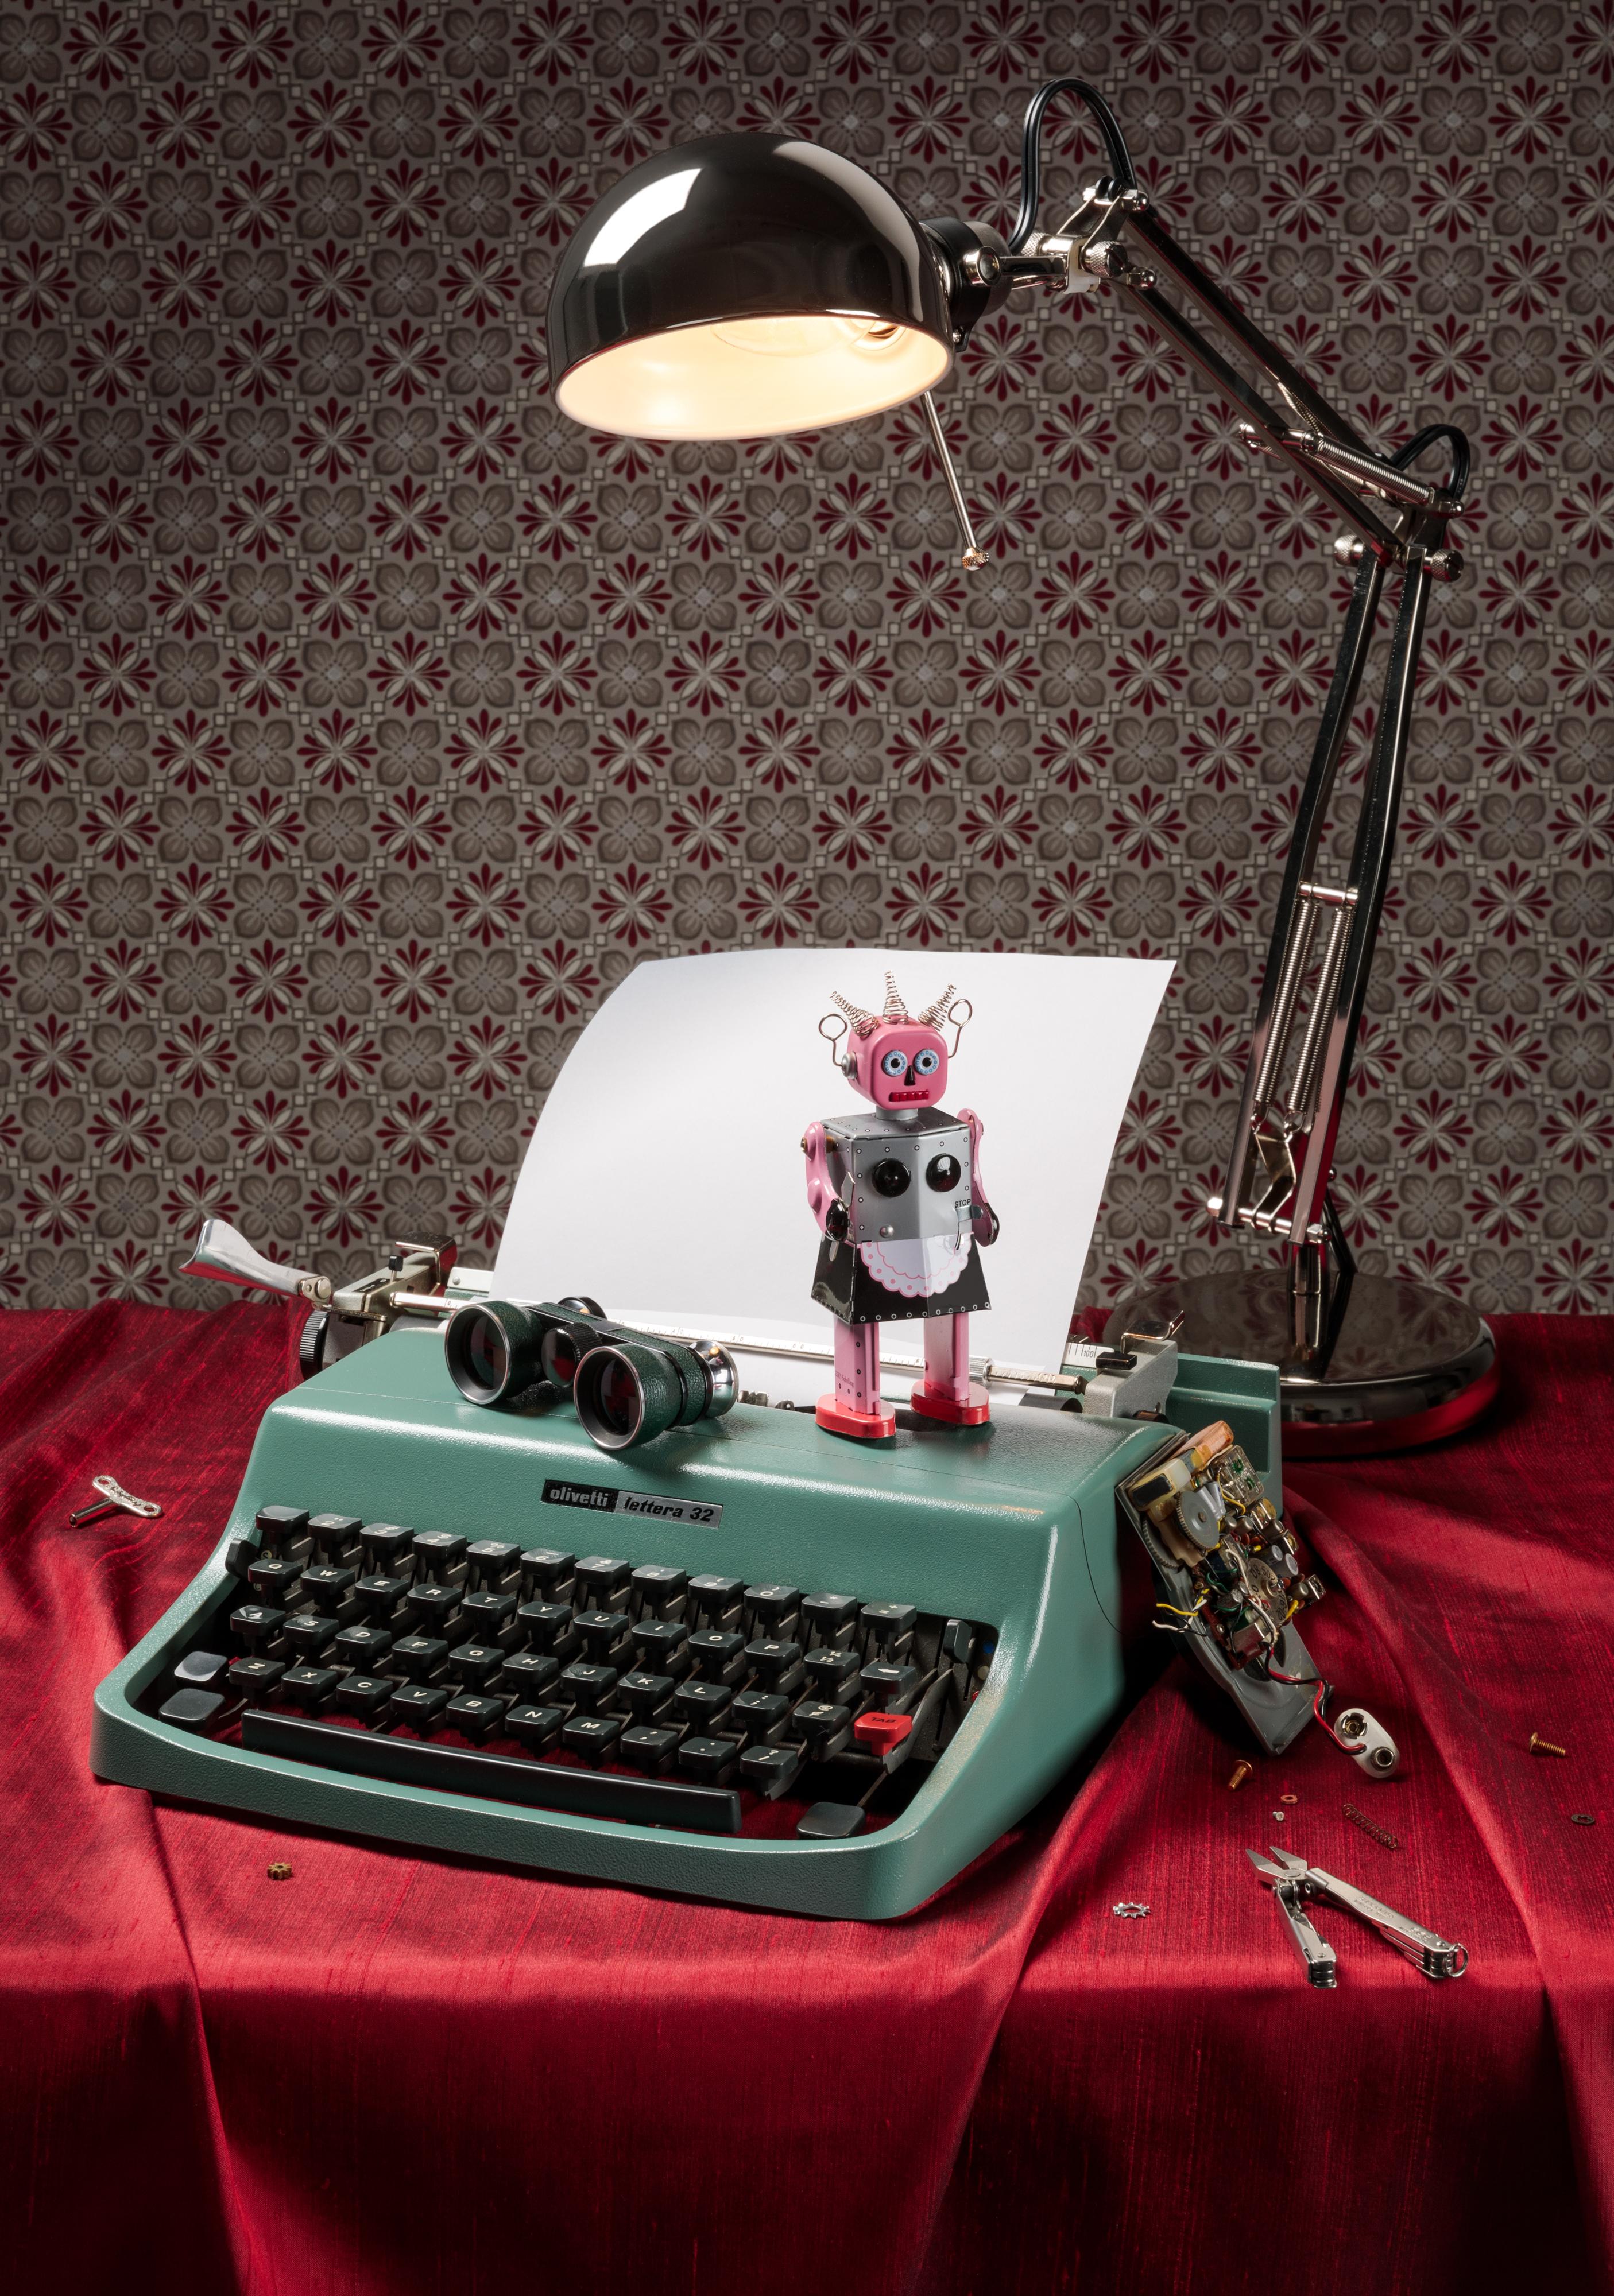 Jeanette May Still-Life Print - “Still Life with Robot” Contemporary Still-life Photo with Vintage Typewriter